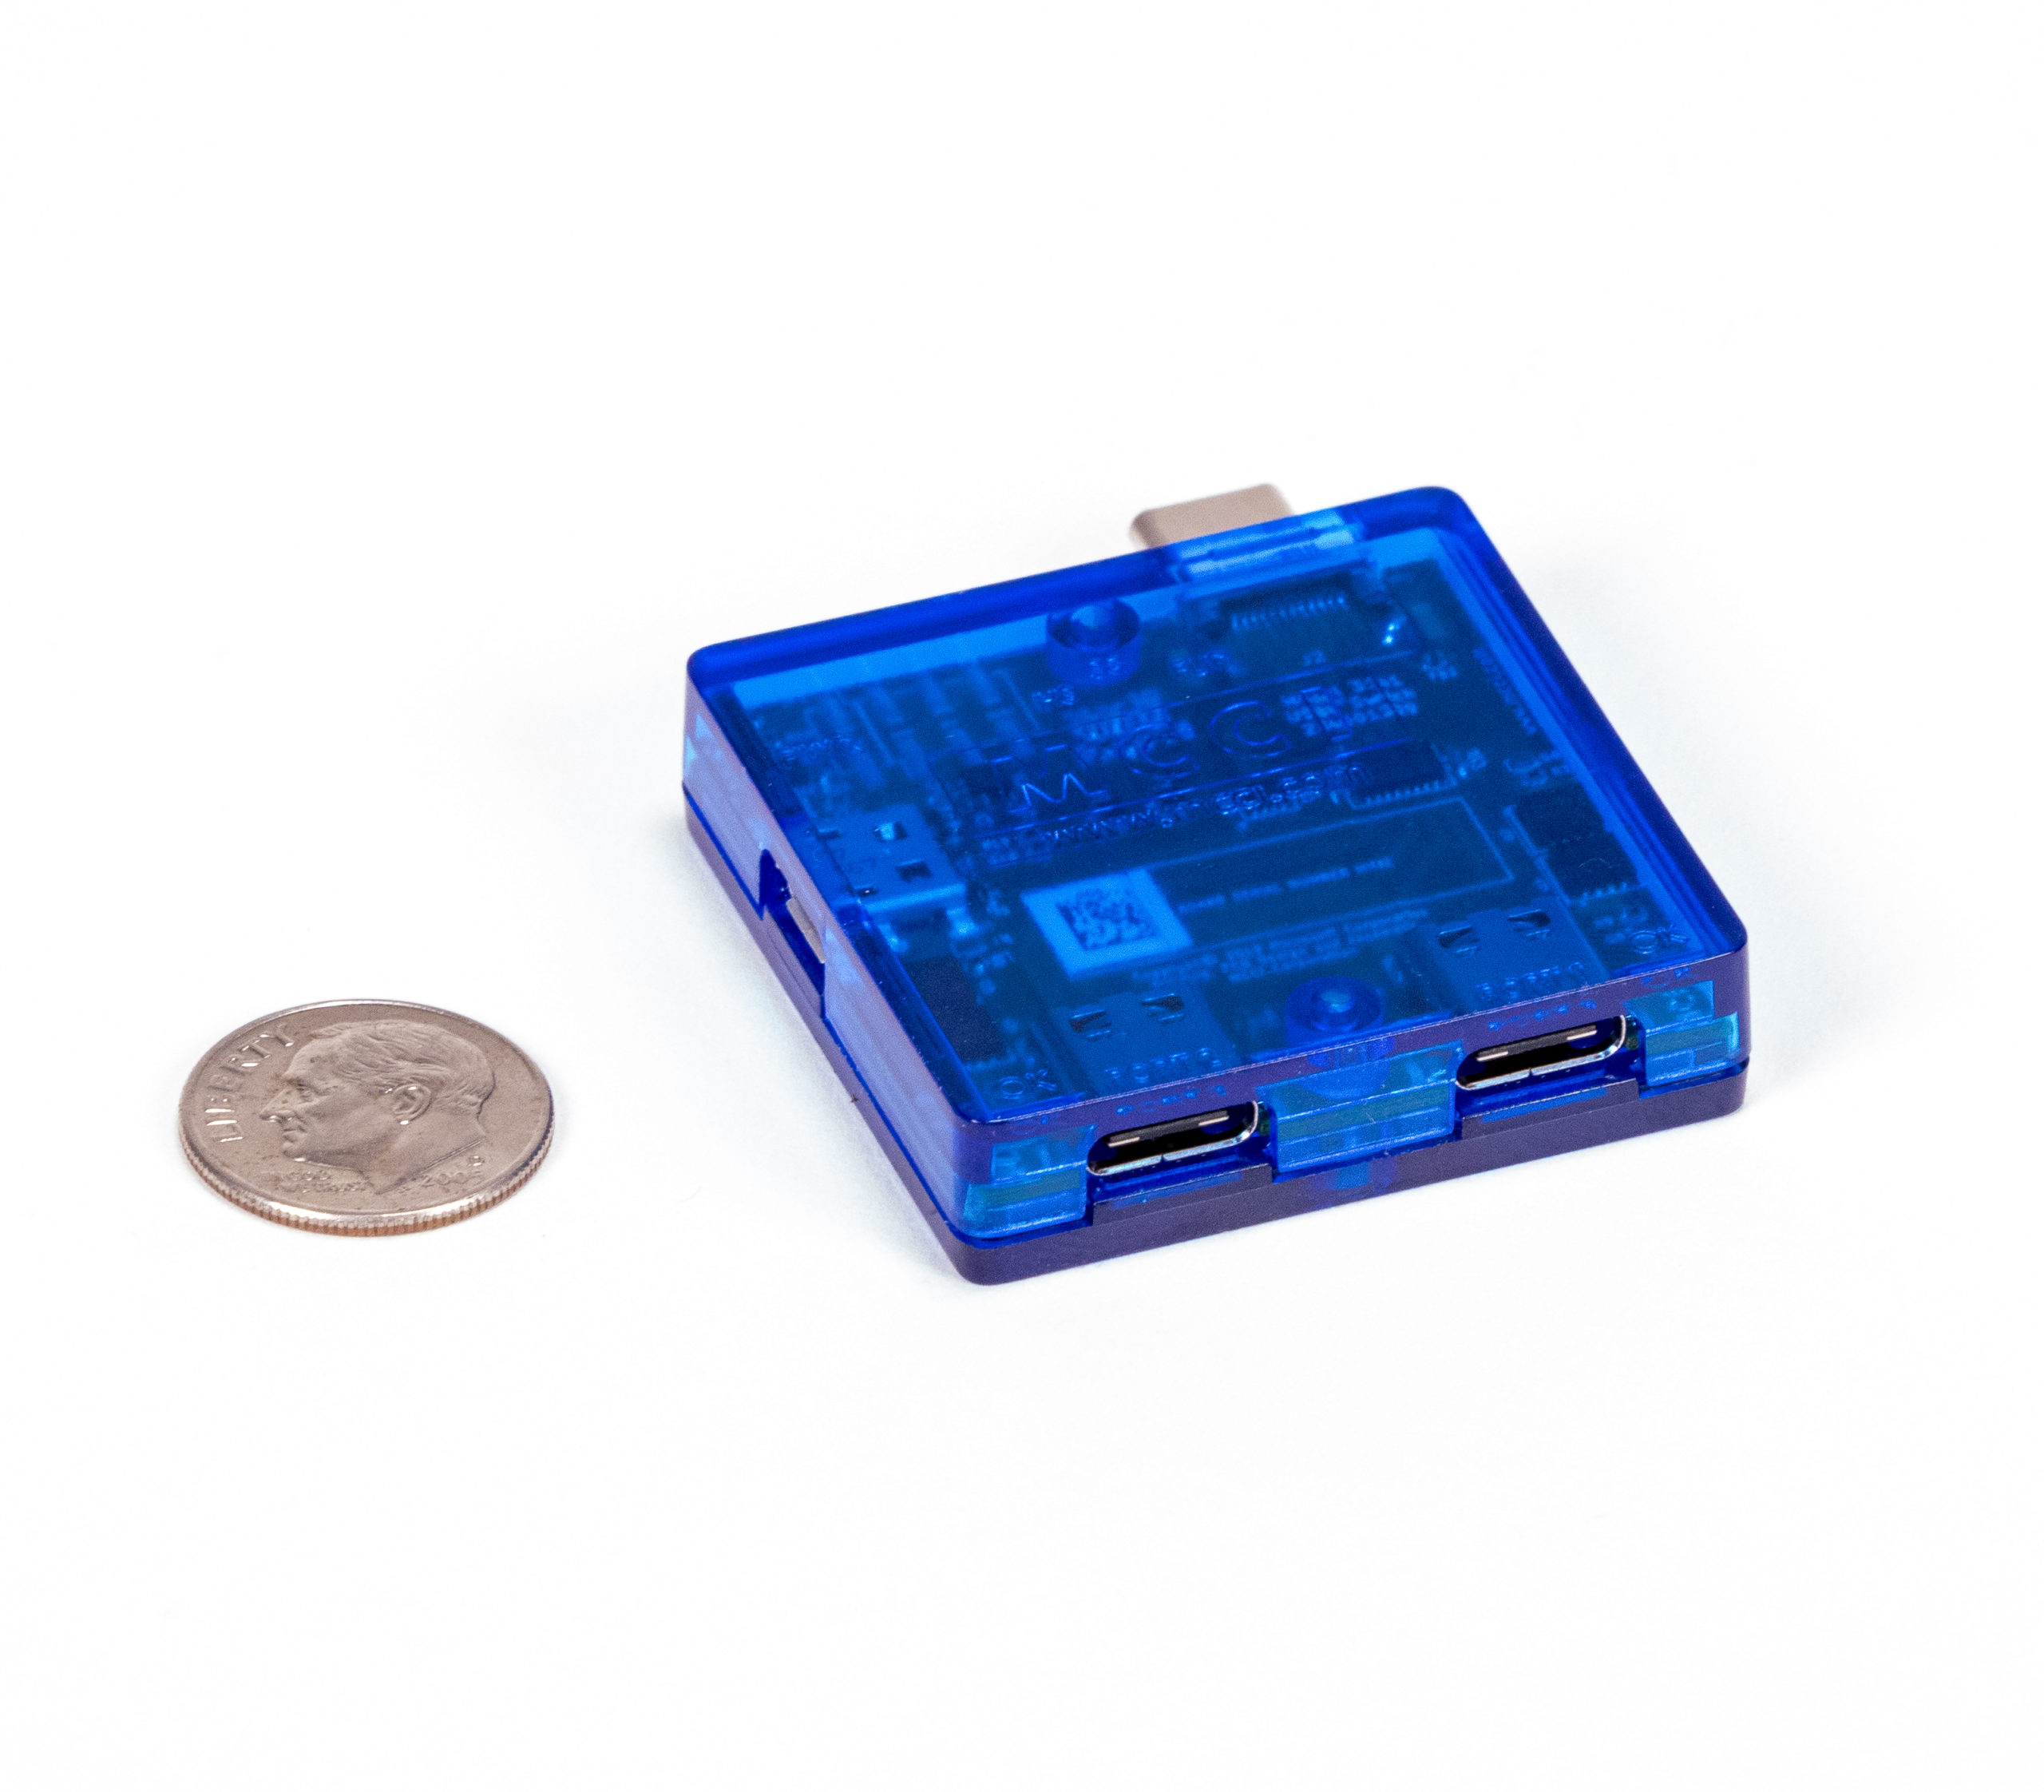 USB4 Switch in enclosure, with dime for scale